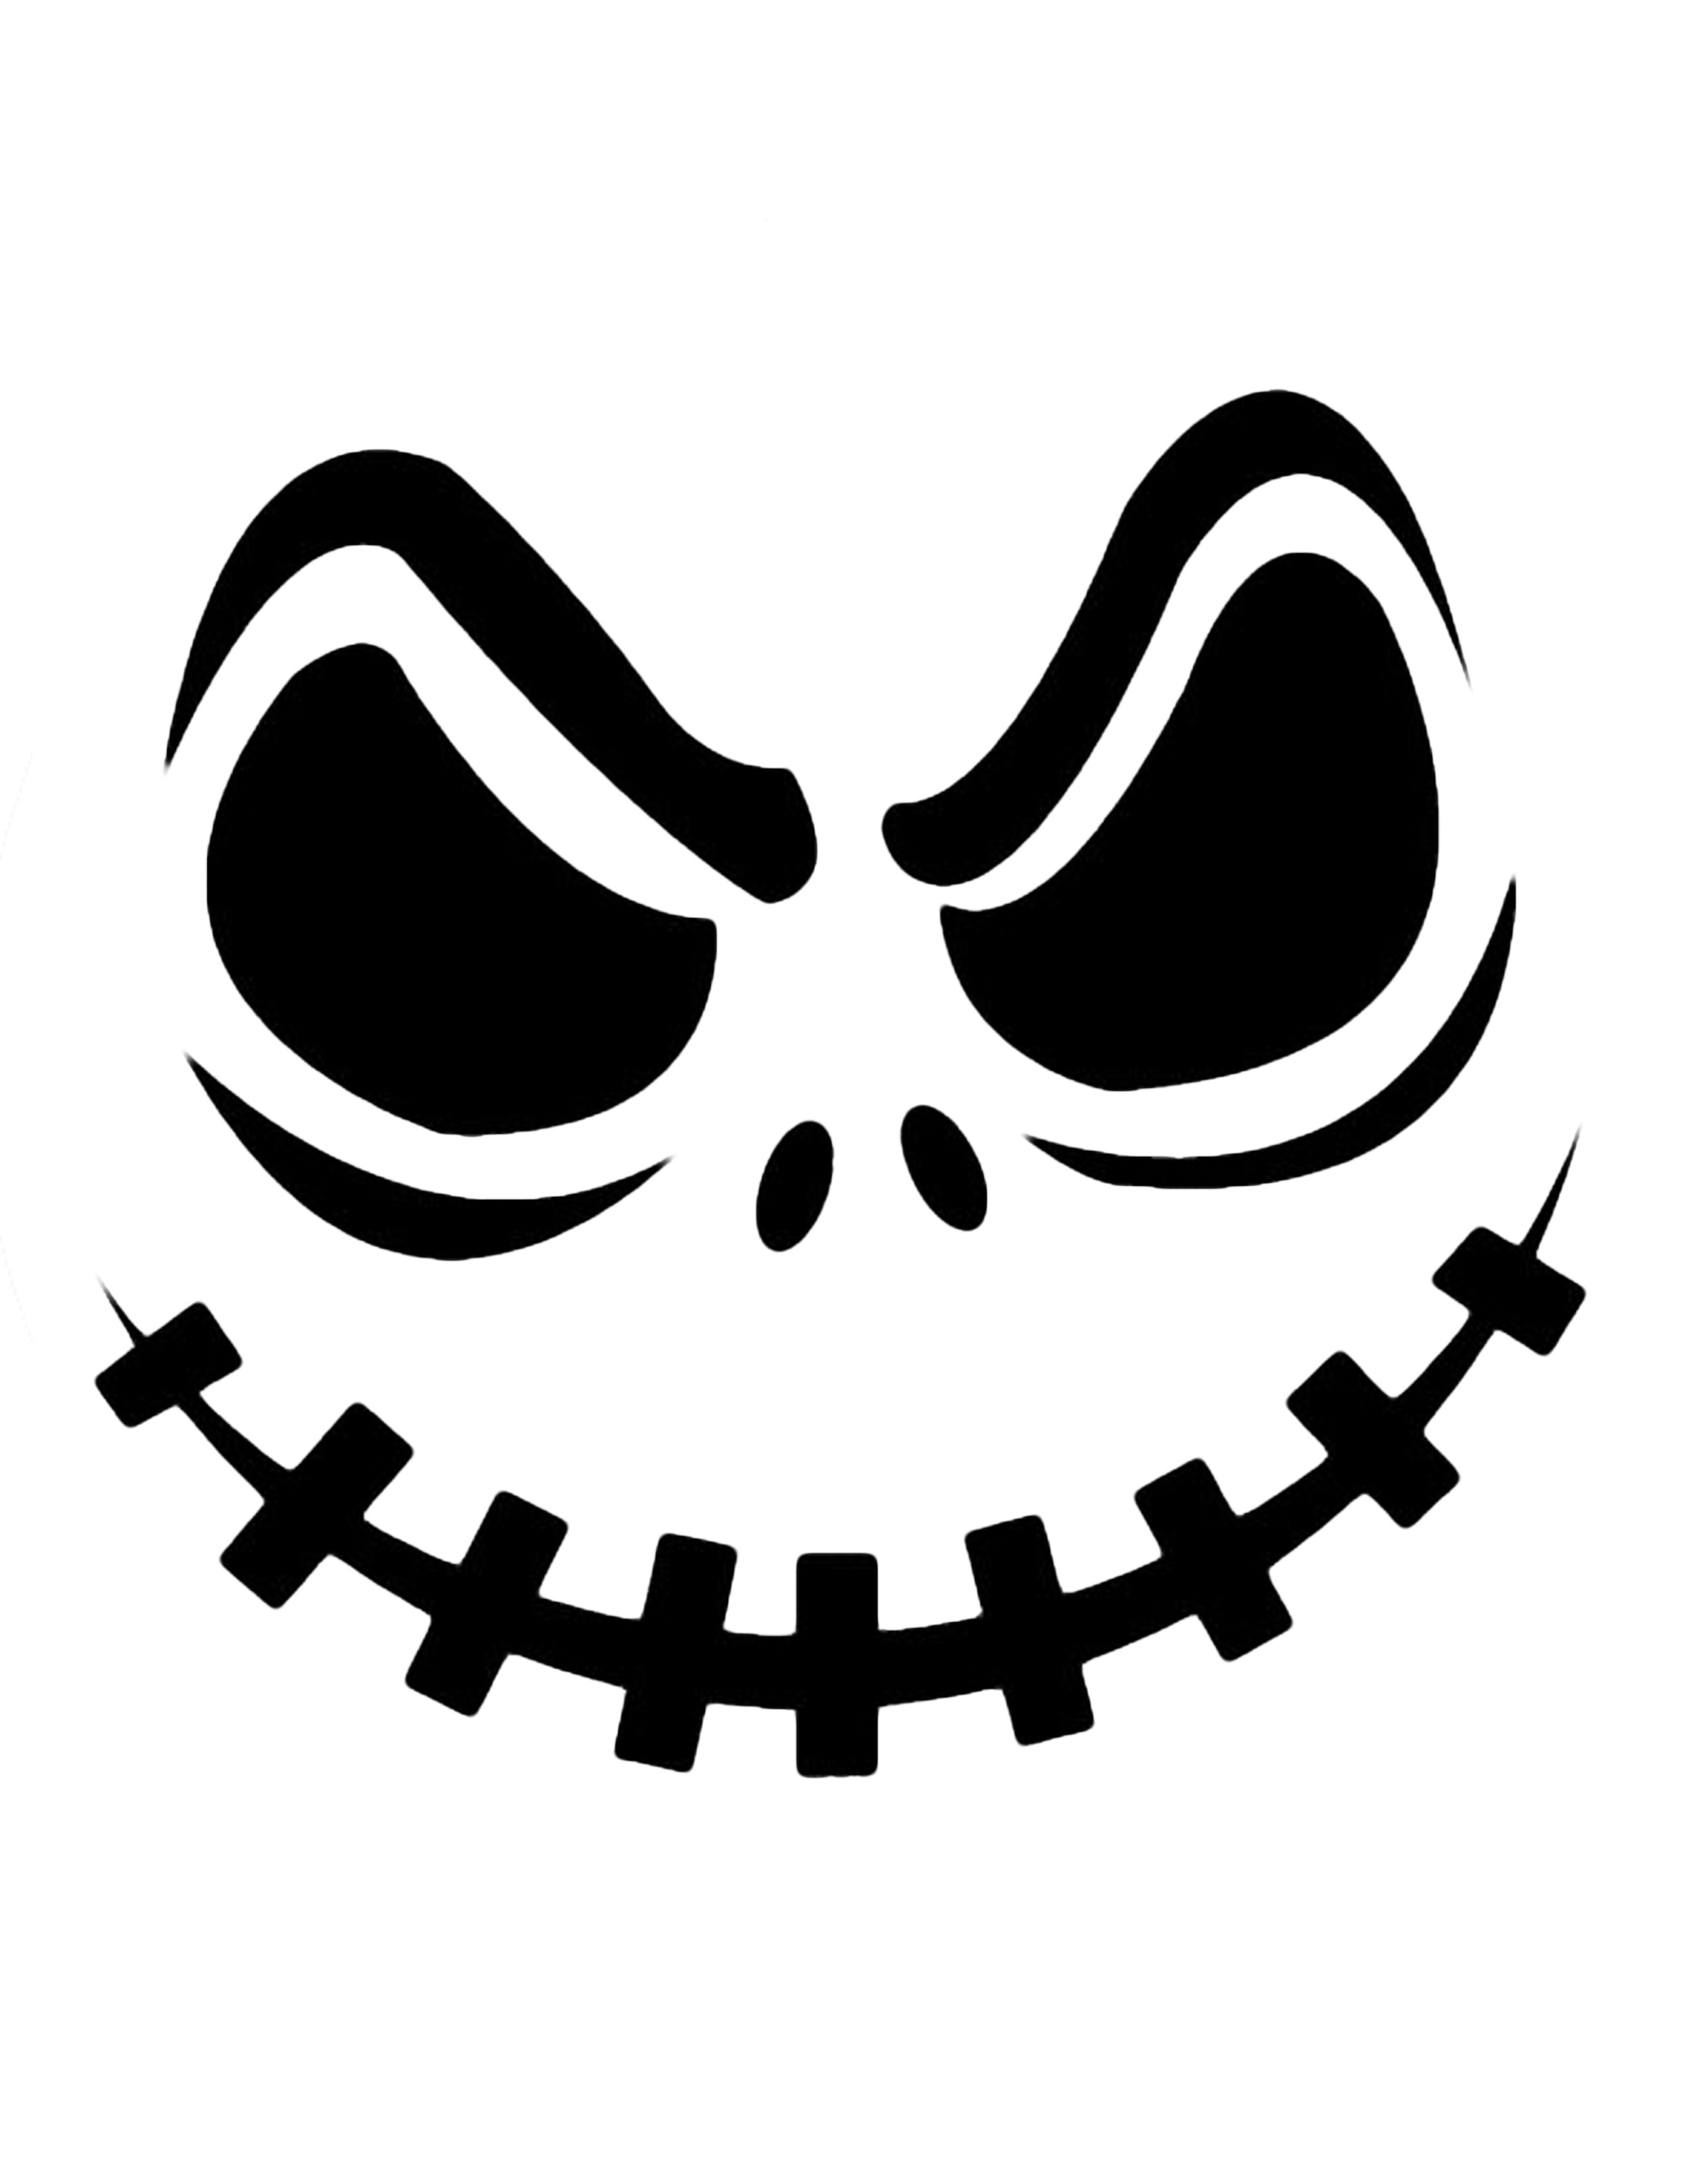 Scary pumpkin eith arms clipart black and white 